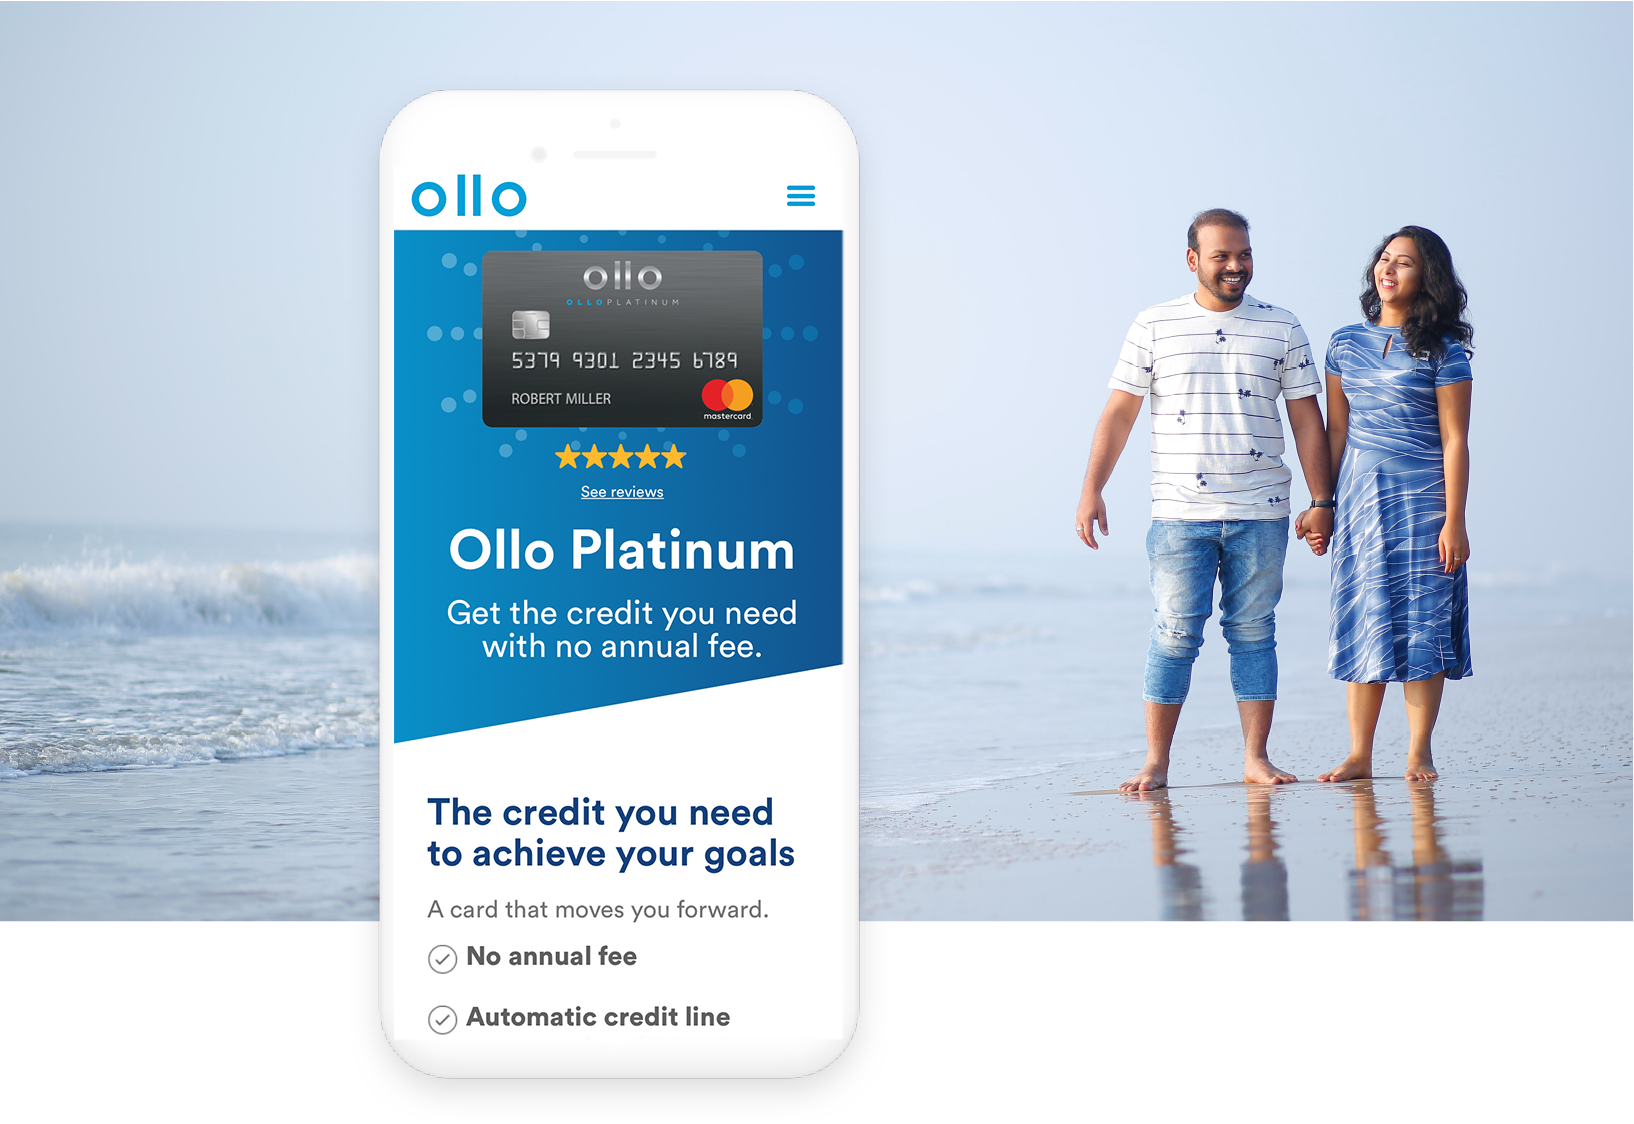 Ollo mobile app displayed over background of couple walking on a beach